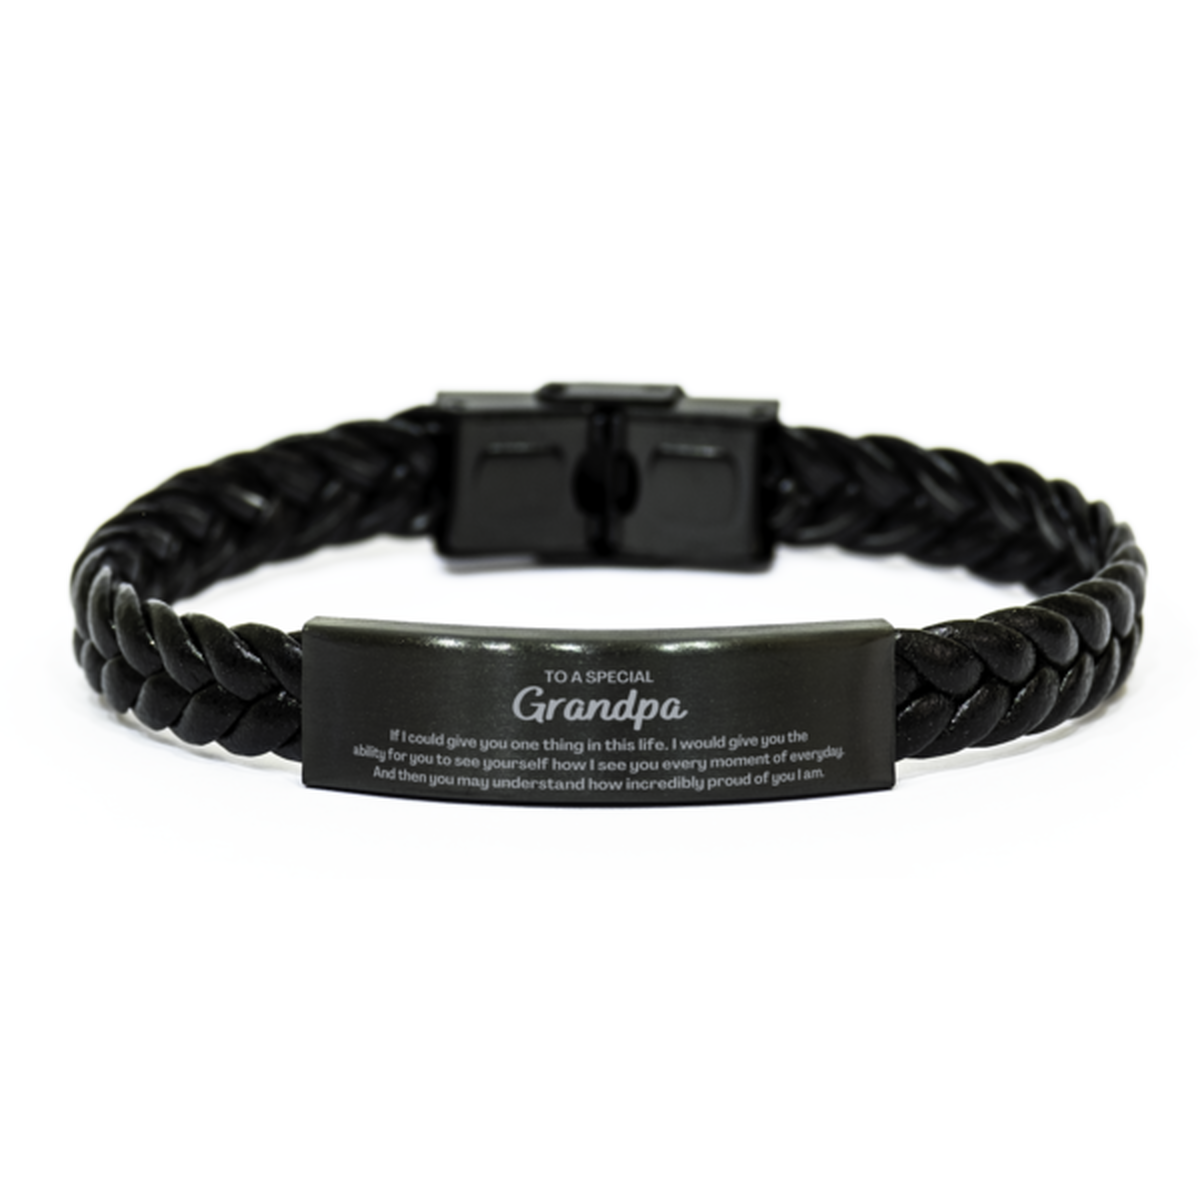 To My Grandpa Braided Leather Bracelet, Gifts For Grandpa Engraved, Inspirational Gifts for Christmas Birthday, Epic Gifts for Grandpa To A Special Grandpa how incredibly proud of you I am